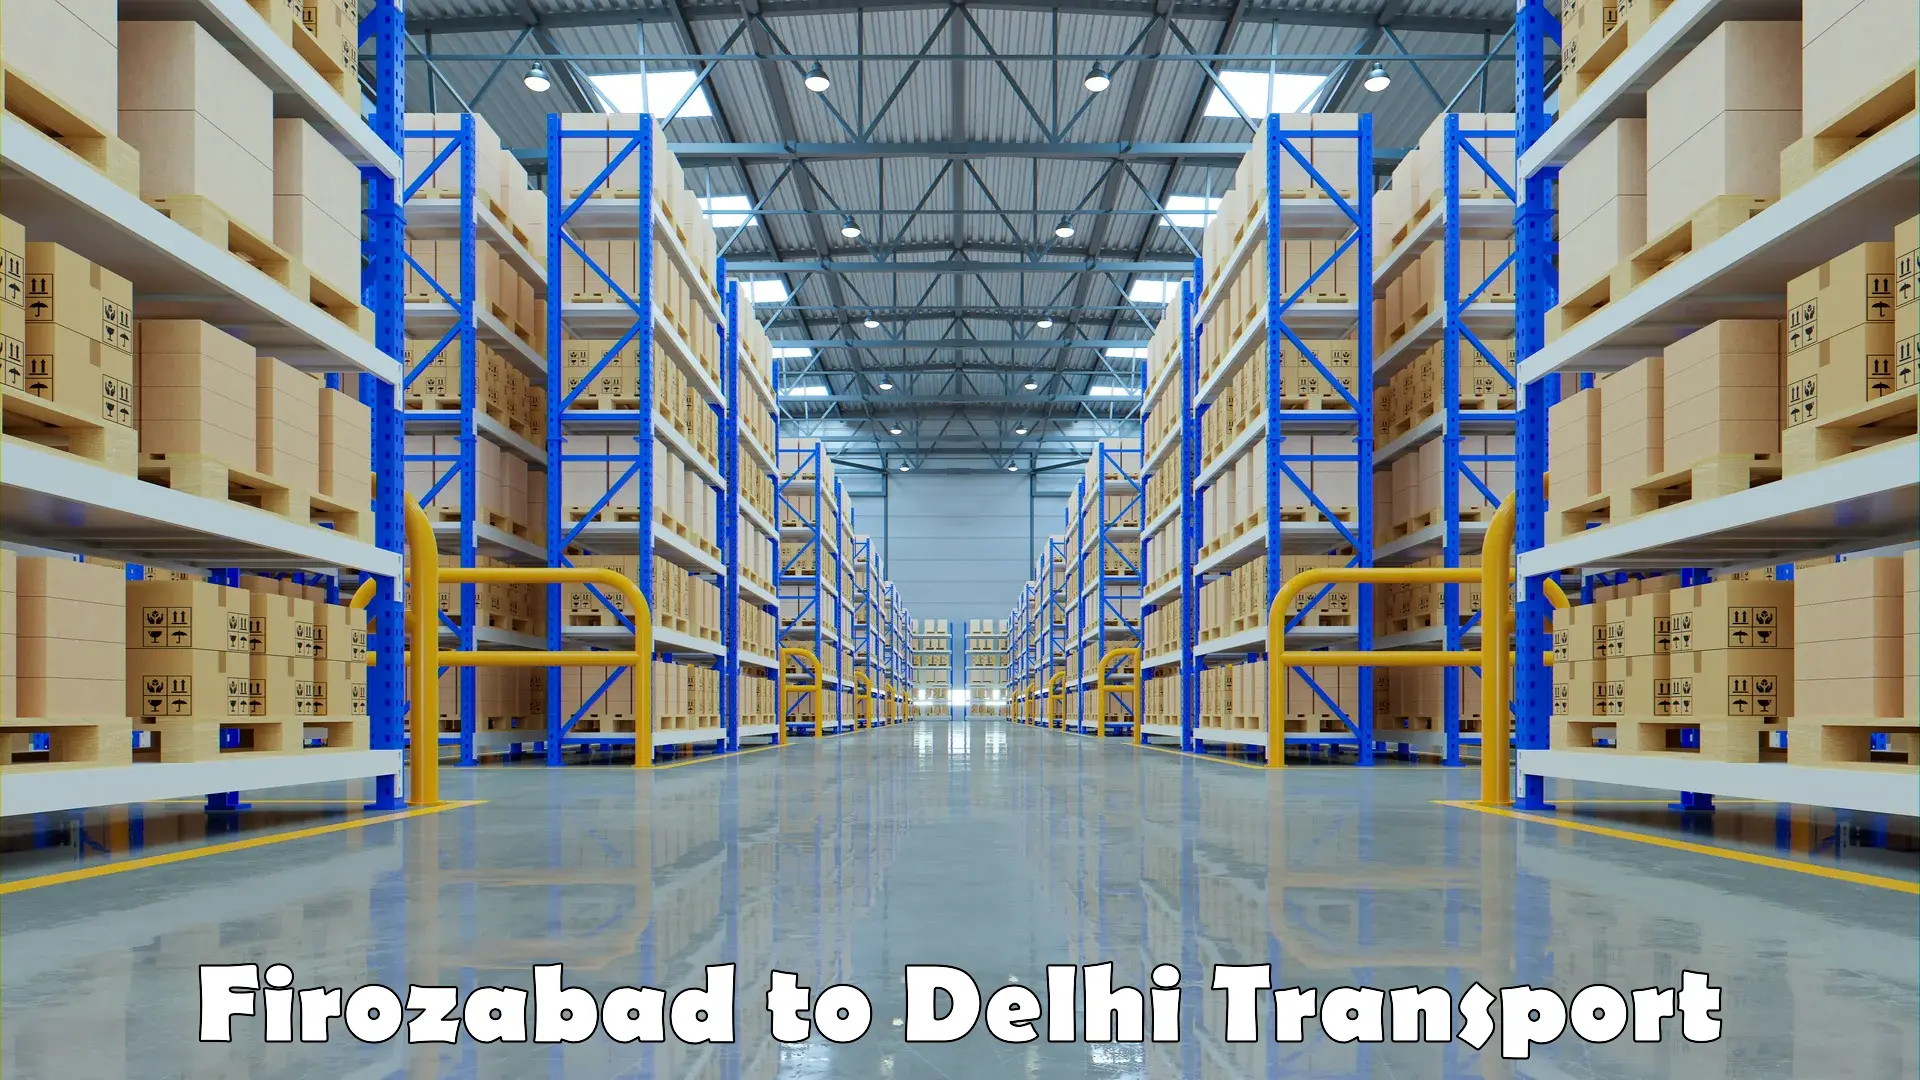 Container transport service Firozabad to Delhi